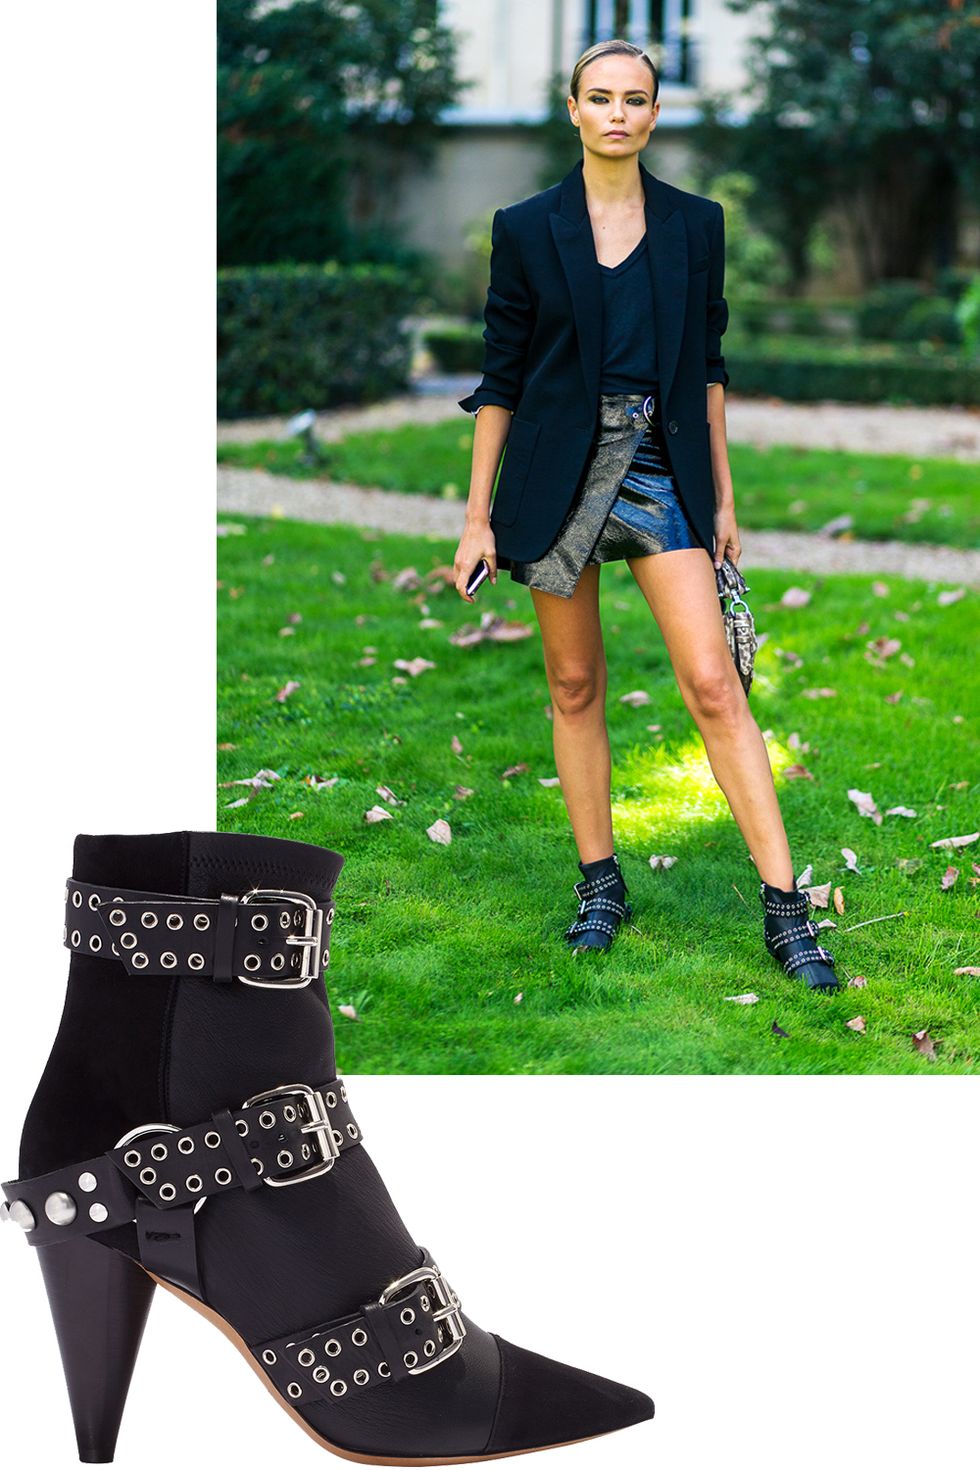 <p>Studded boots&nbsp;with a walkable heel—<span class="redactor-invisible-space" data-redactor-tag="span" data-redactor-class="redactor-invisible-space" data-verified="redactor">as seen on Natasha Poly—</span><span class="redactor-invisible-space"></span>struck the right balance of fashion and function.&nbsp;</p><p><em data-redactor-tag="em" data-verified="redactor">Isabel Marant boot, $1,115 (pre-order), <strong data-redactor-tag="strong" data-verified="redactor"><a href="https://shop.harpersbazaar.com/i/isabel-marant/lysett-boot-10011.html" target="_blank">shopBAZAAR.com</a></strong>.</em></p>